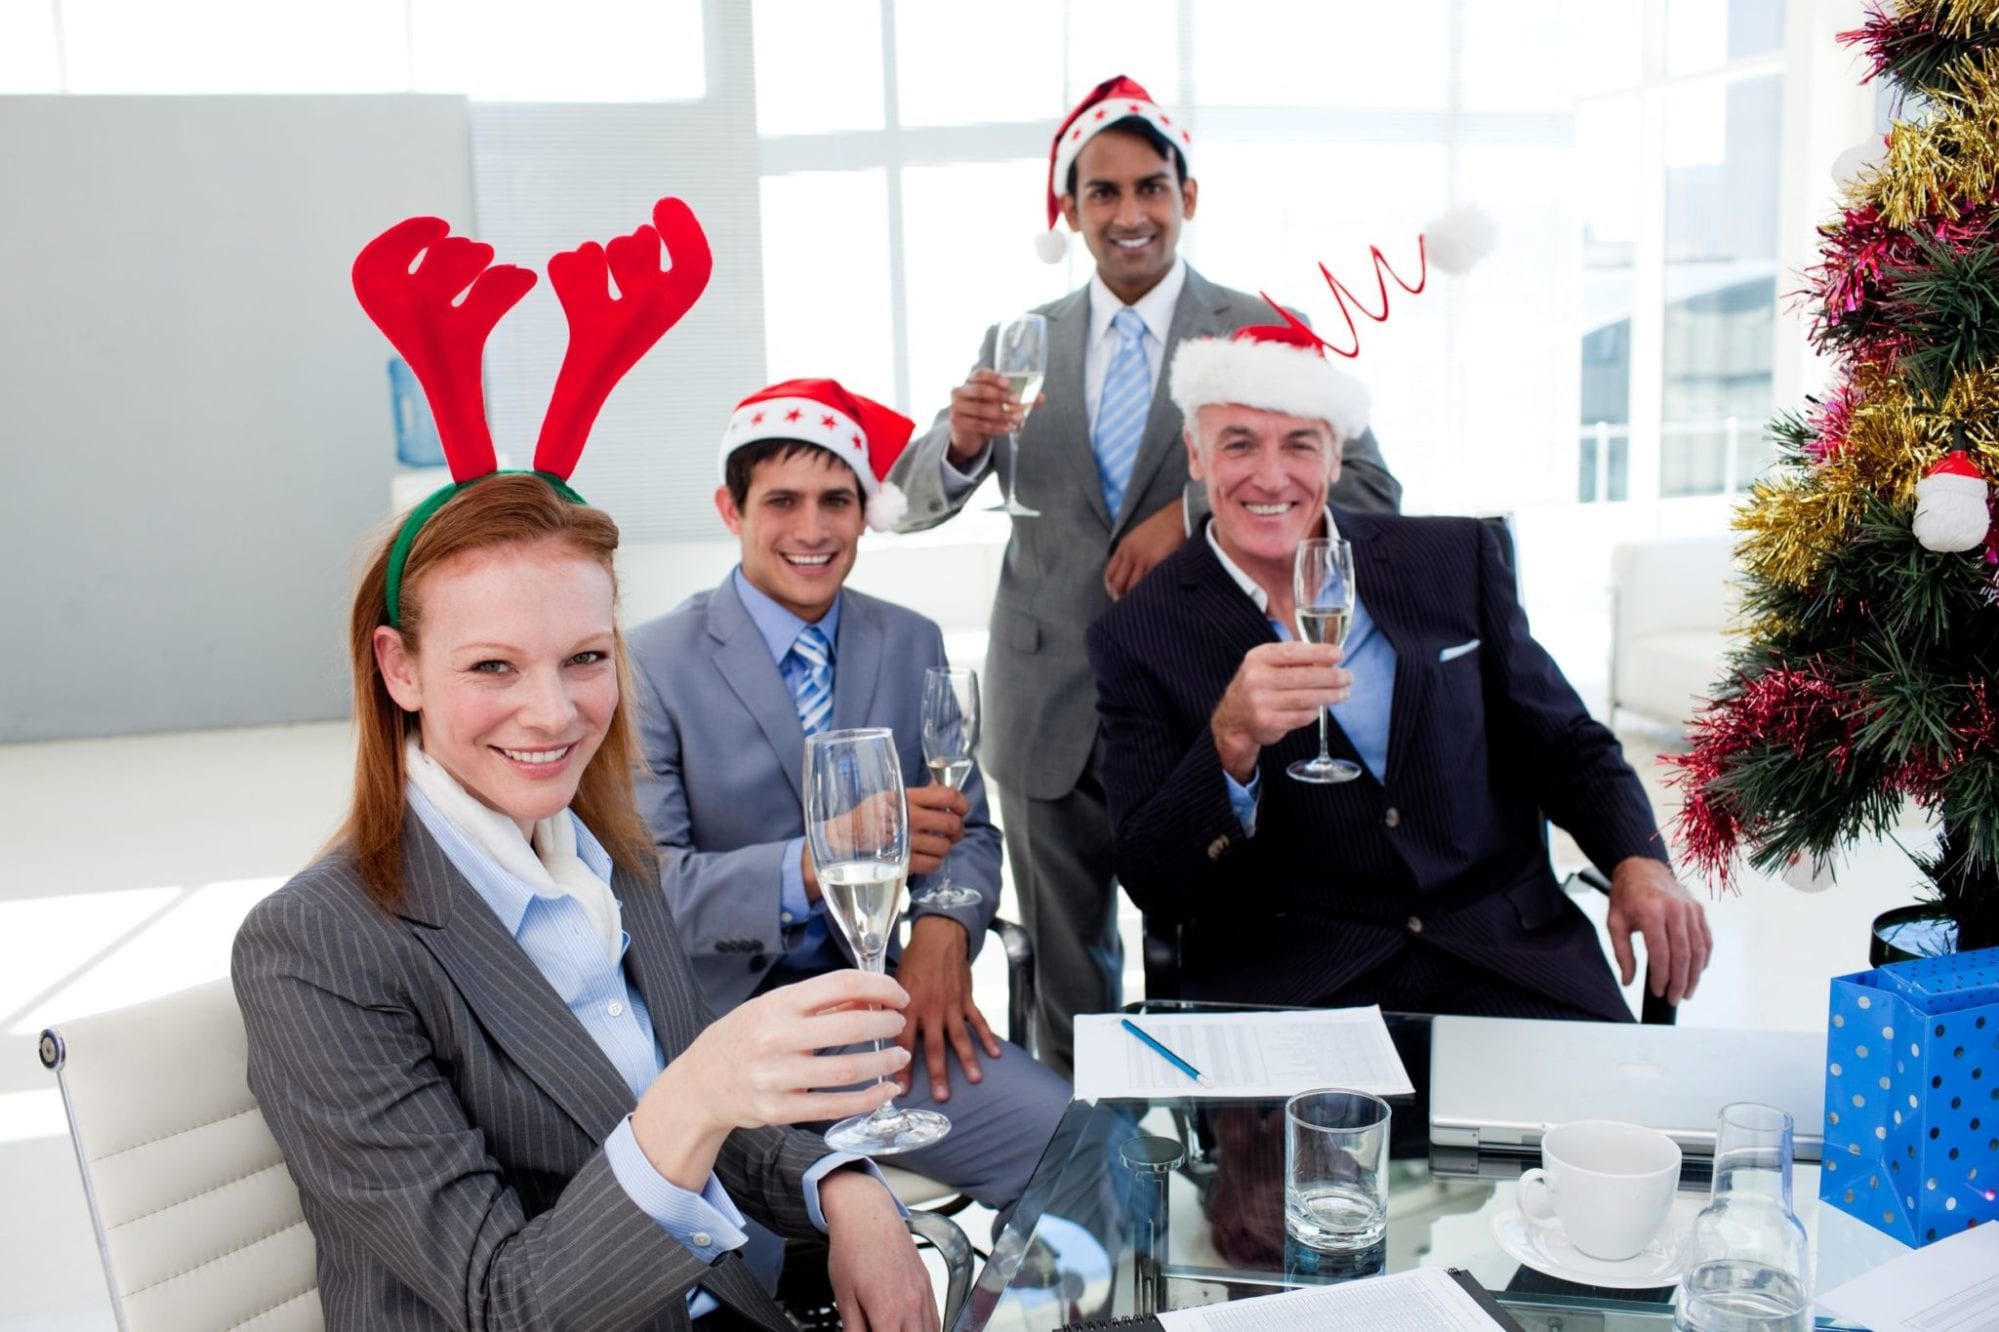 6 Tips to Make Your Corporate Holiday Party Fun and Budget-Friendly ...